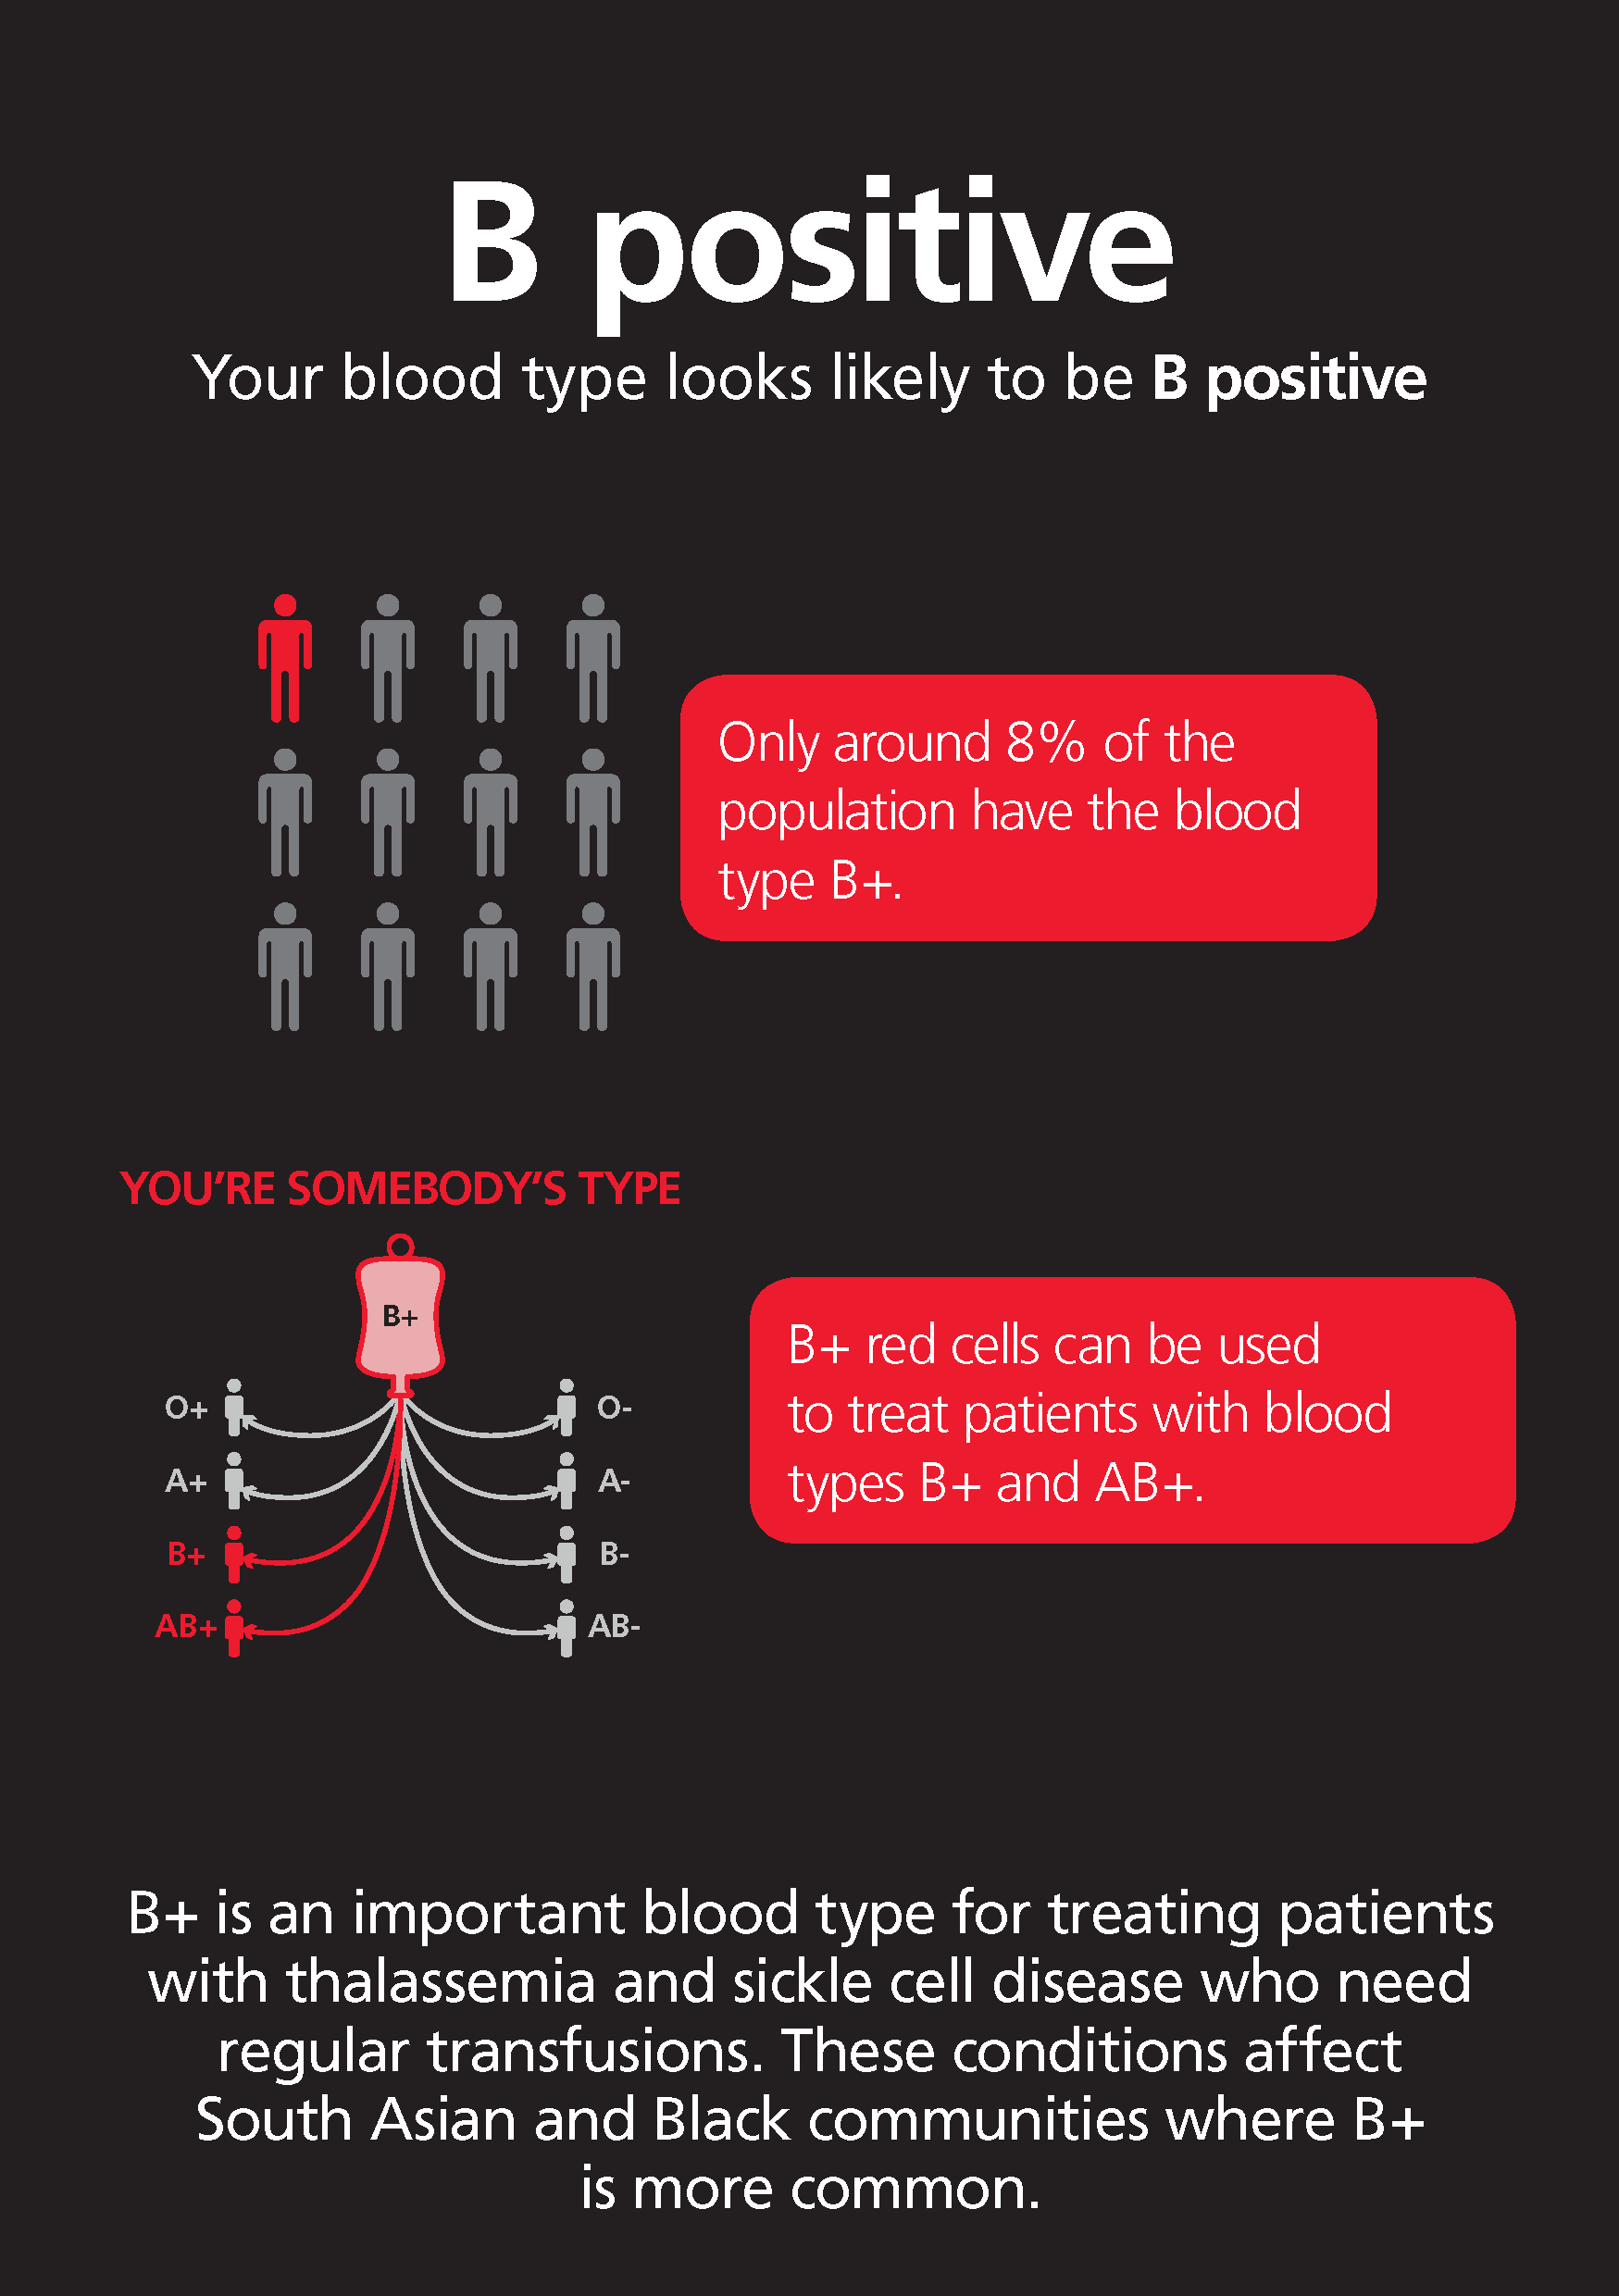 Blood Types: What They Are and Mean for Your Health